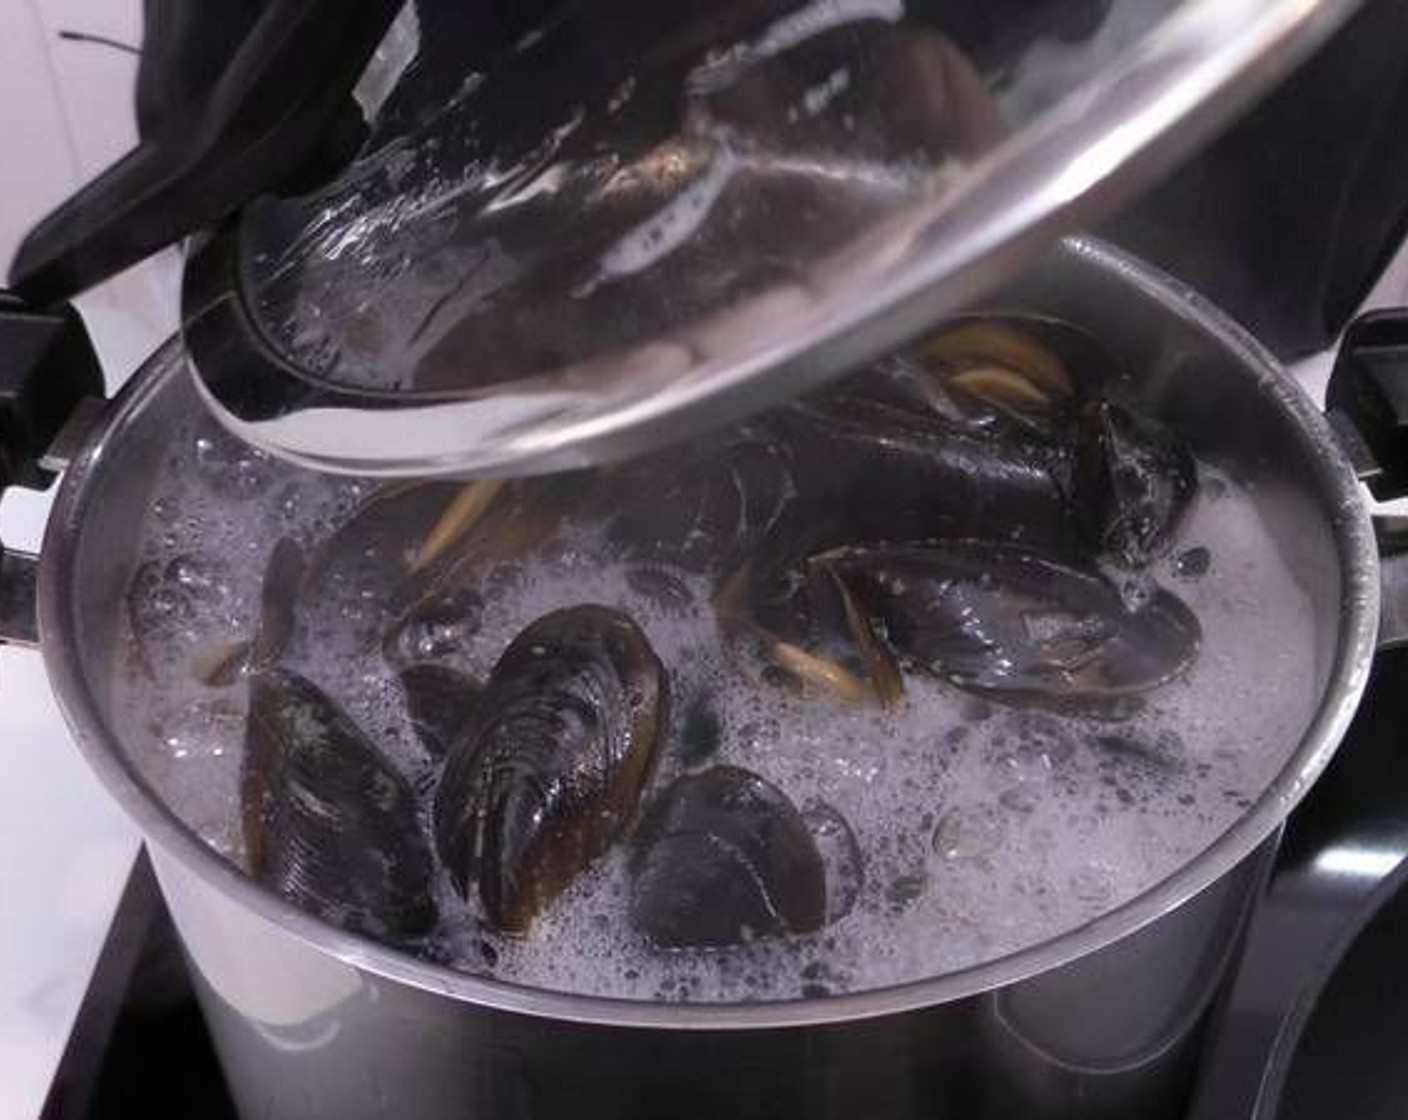 step 2 Cook for 10 minutes on medium heat. Make sure all the mussels open up, if there are any that do not open discard them.